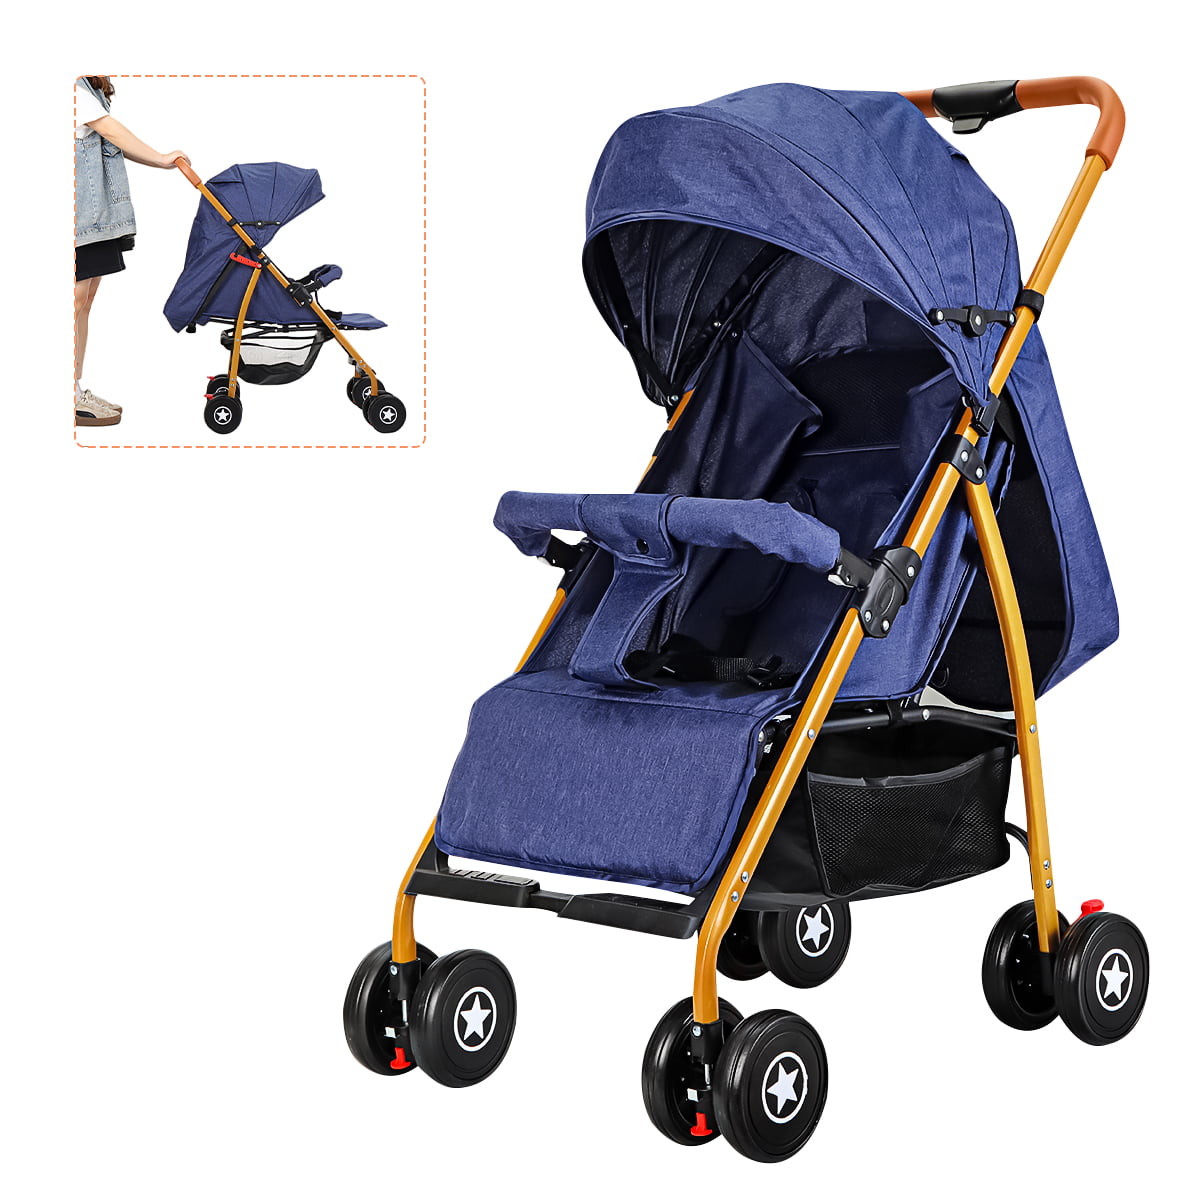 ShaHa Toddler Stroller with Compact Fold and Lighter Weight Easy to Disassemble and Washable Easy to Travel with and Comes with Adjustable Backrest 